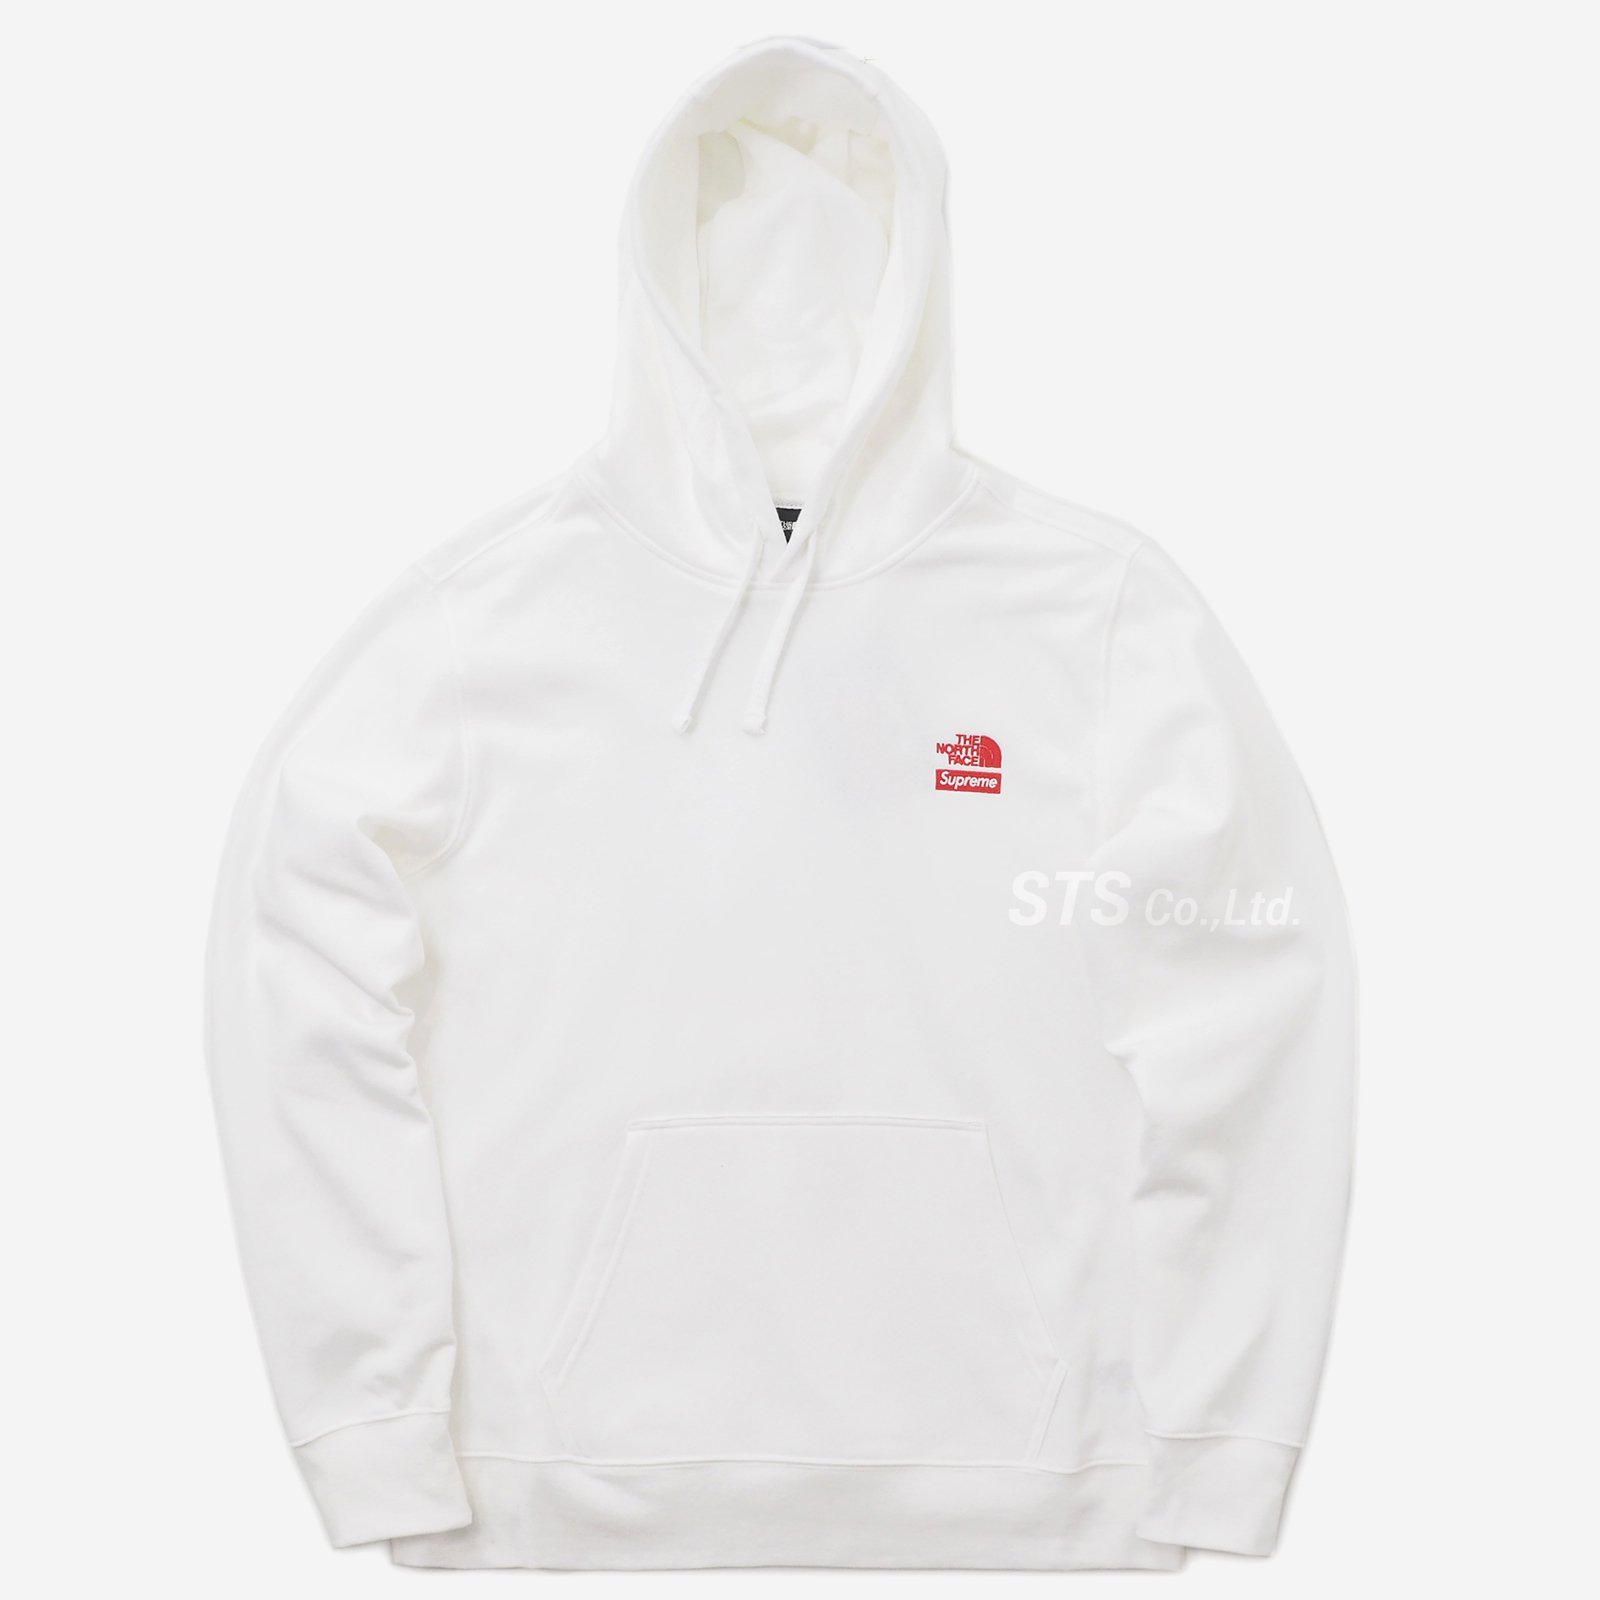 Supreme/The North Face Statue of Liberty Hooded Sweatshirt - ParkSIDER